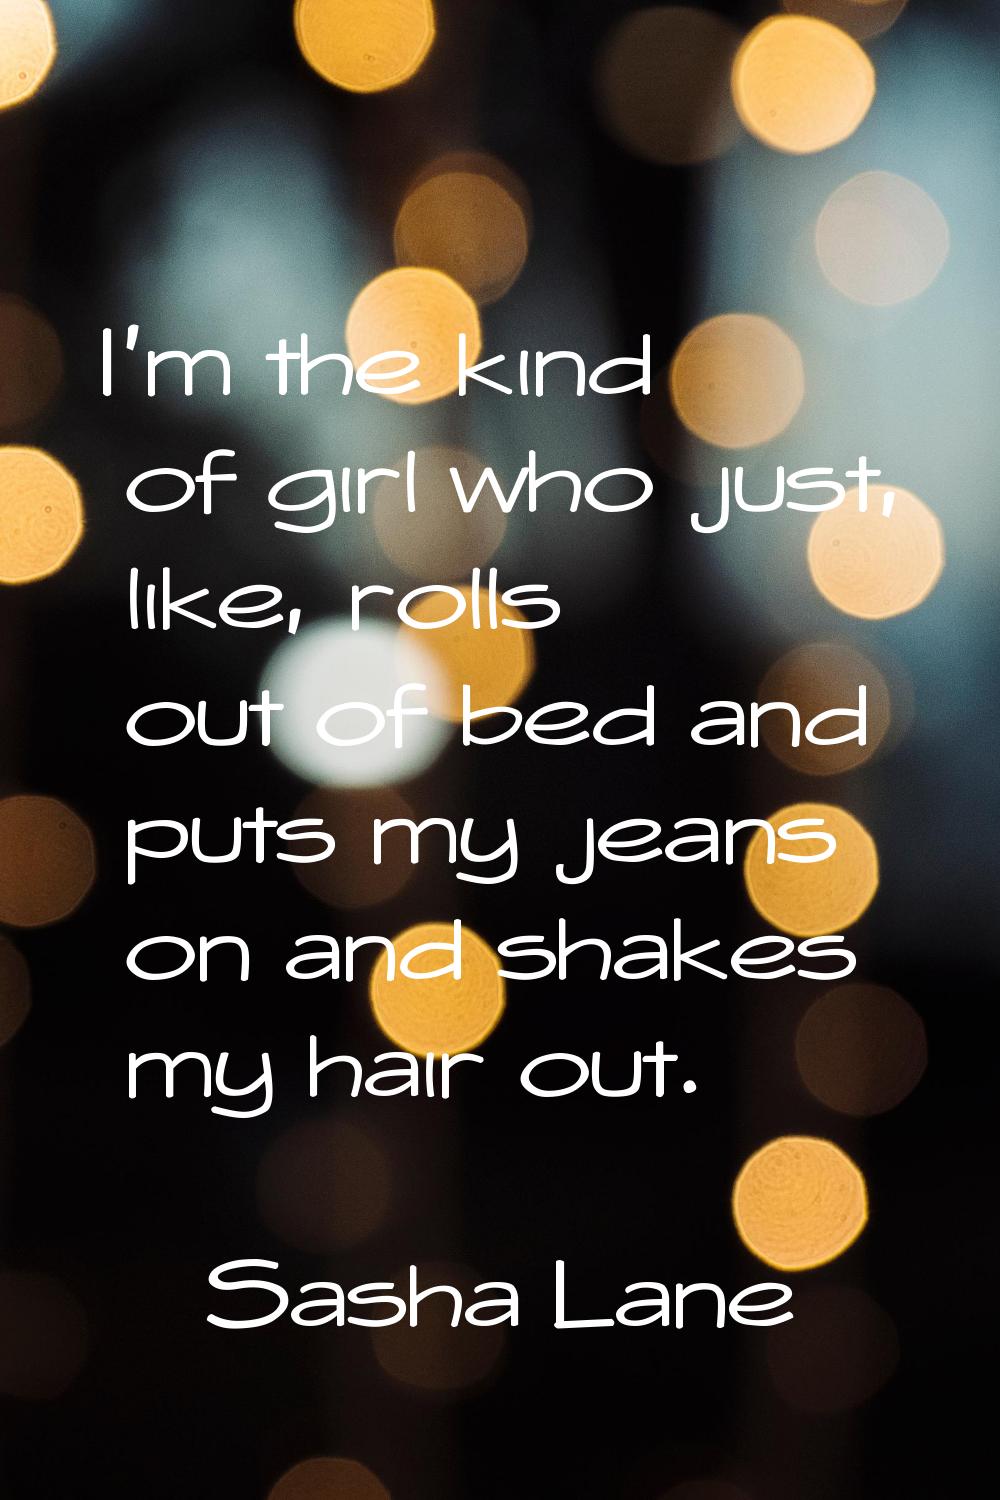 I'm the kind of girl who just, like, rolls out of bed and puts my jeans on and shakes my hair out.